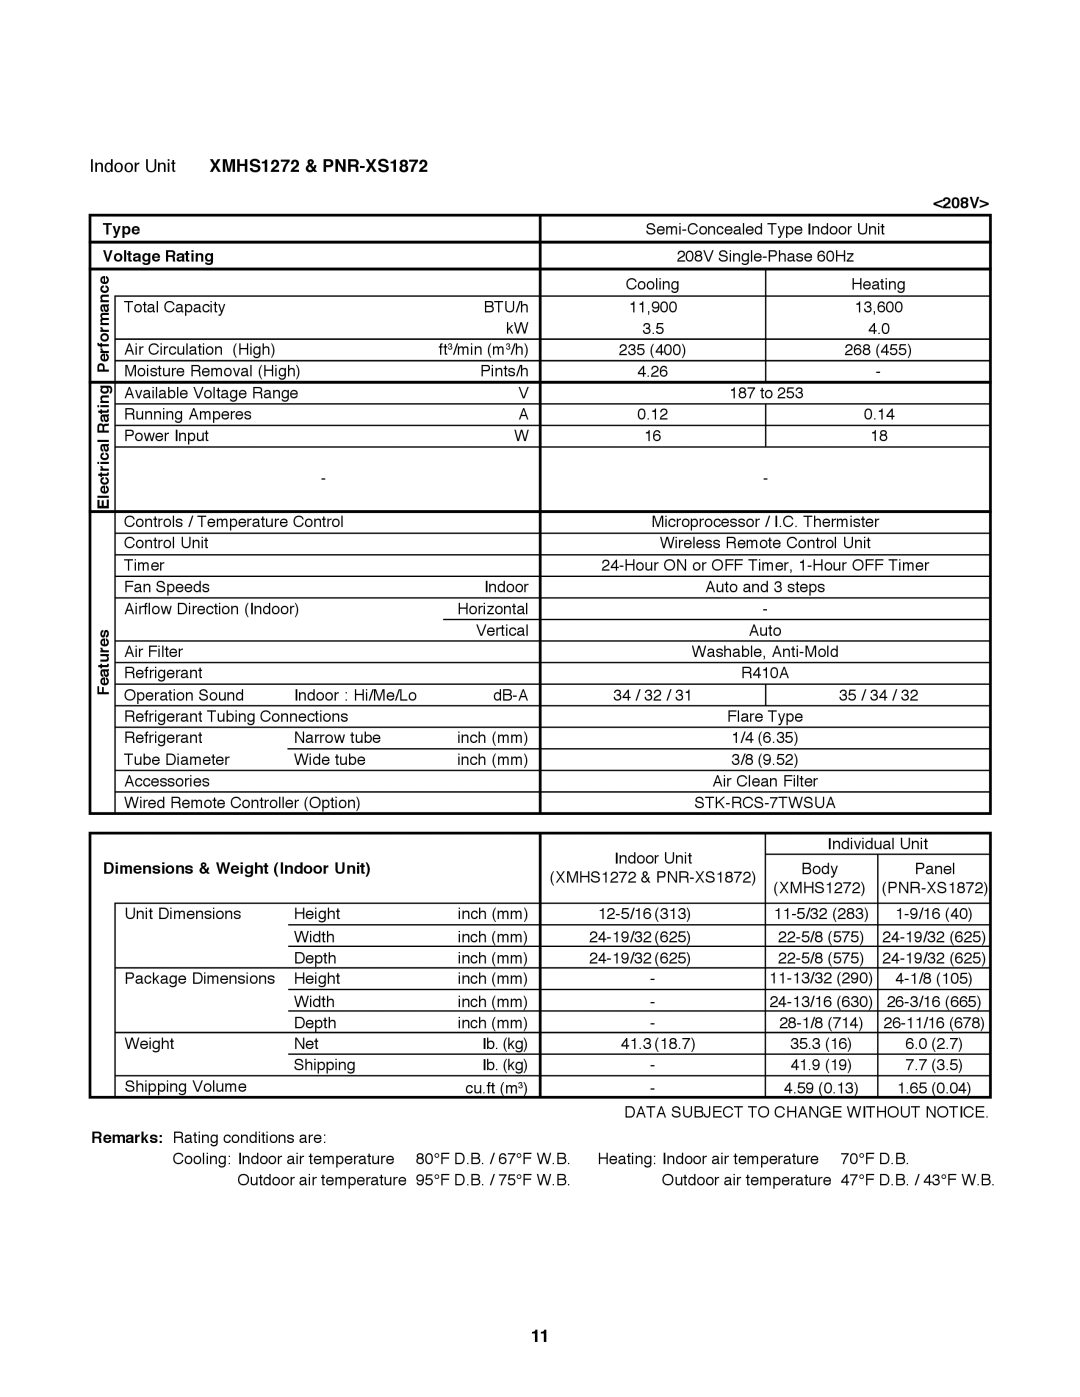 Sanyo XMHS0972 service manual XMHS1272 & PNR-XS1872, <208V>, Type, Voltage Rating, Dimensions & Weight Indoor Unit 